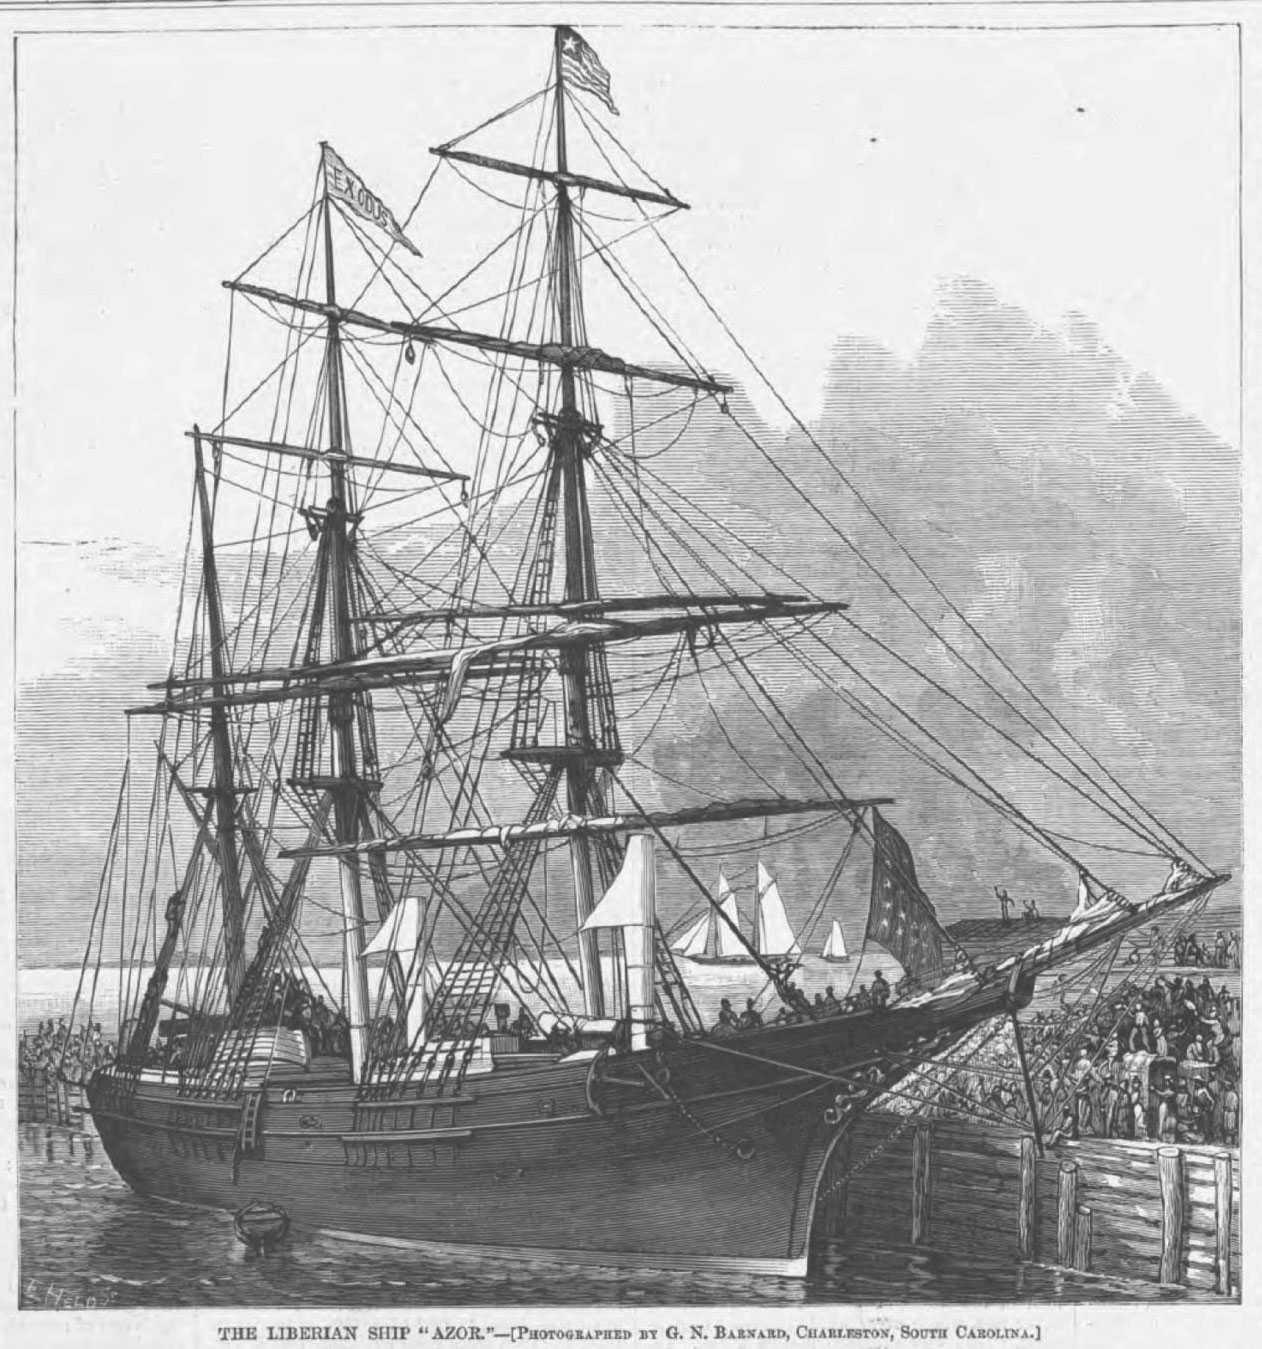 Harper's Weekly page spread about the “The Liberian Ship ‘Azor’ from April 20th, 1878